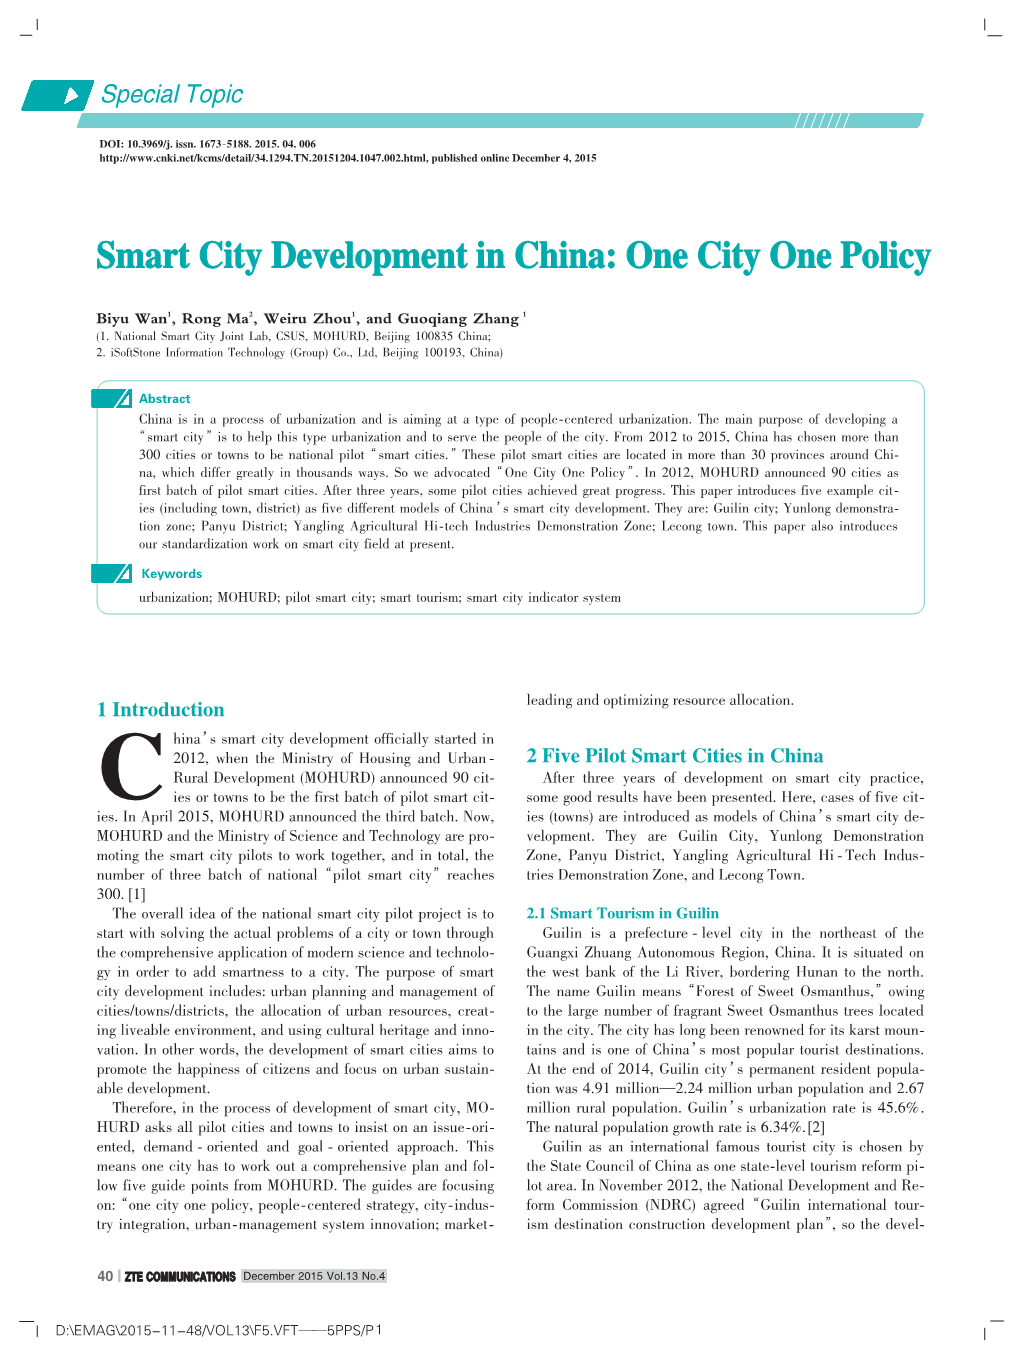 Smart City Development in China: One City One Policy